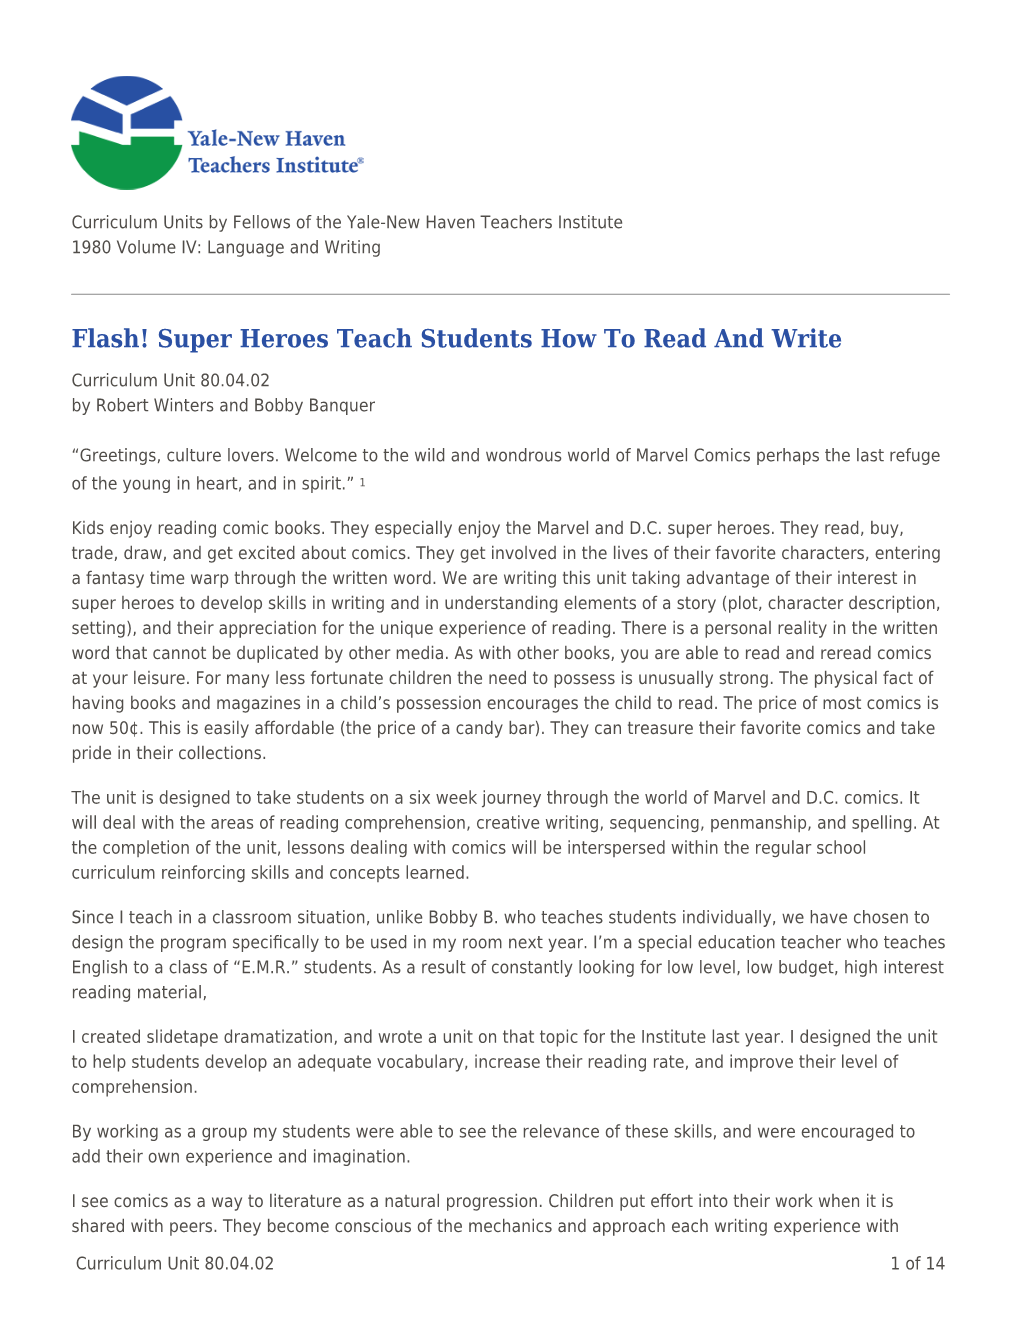 Super Heroes Teach Students How to Read and Write